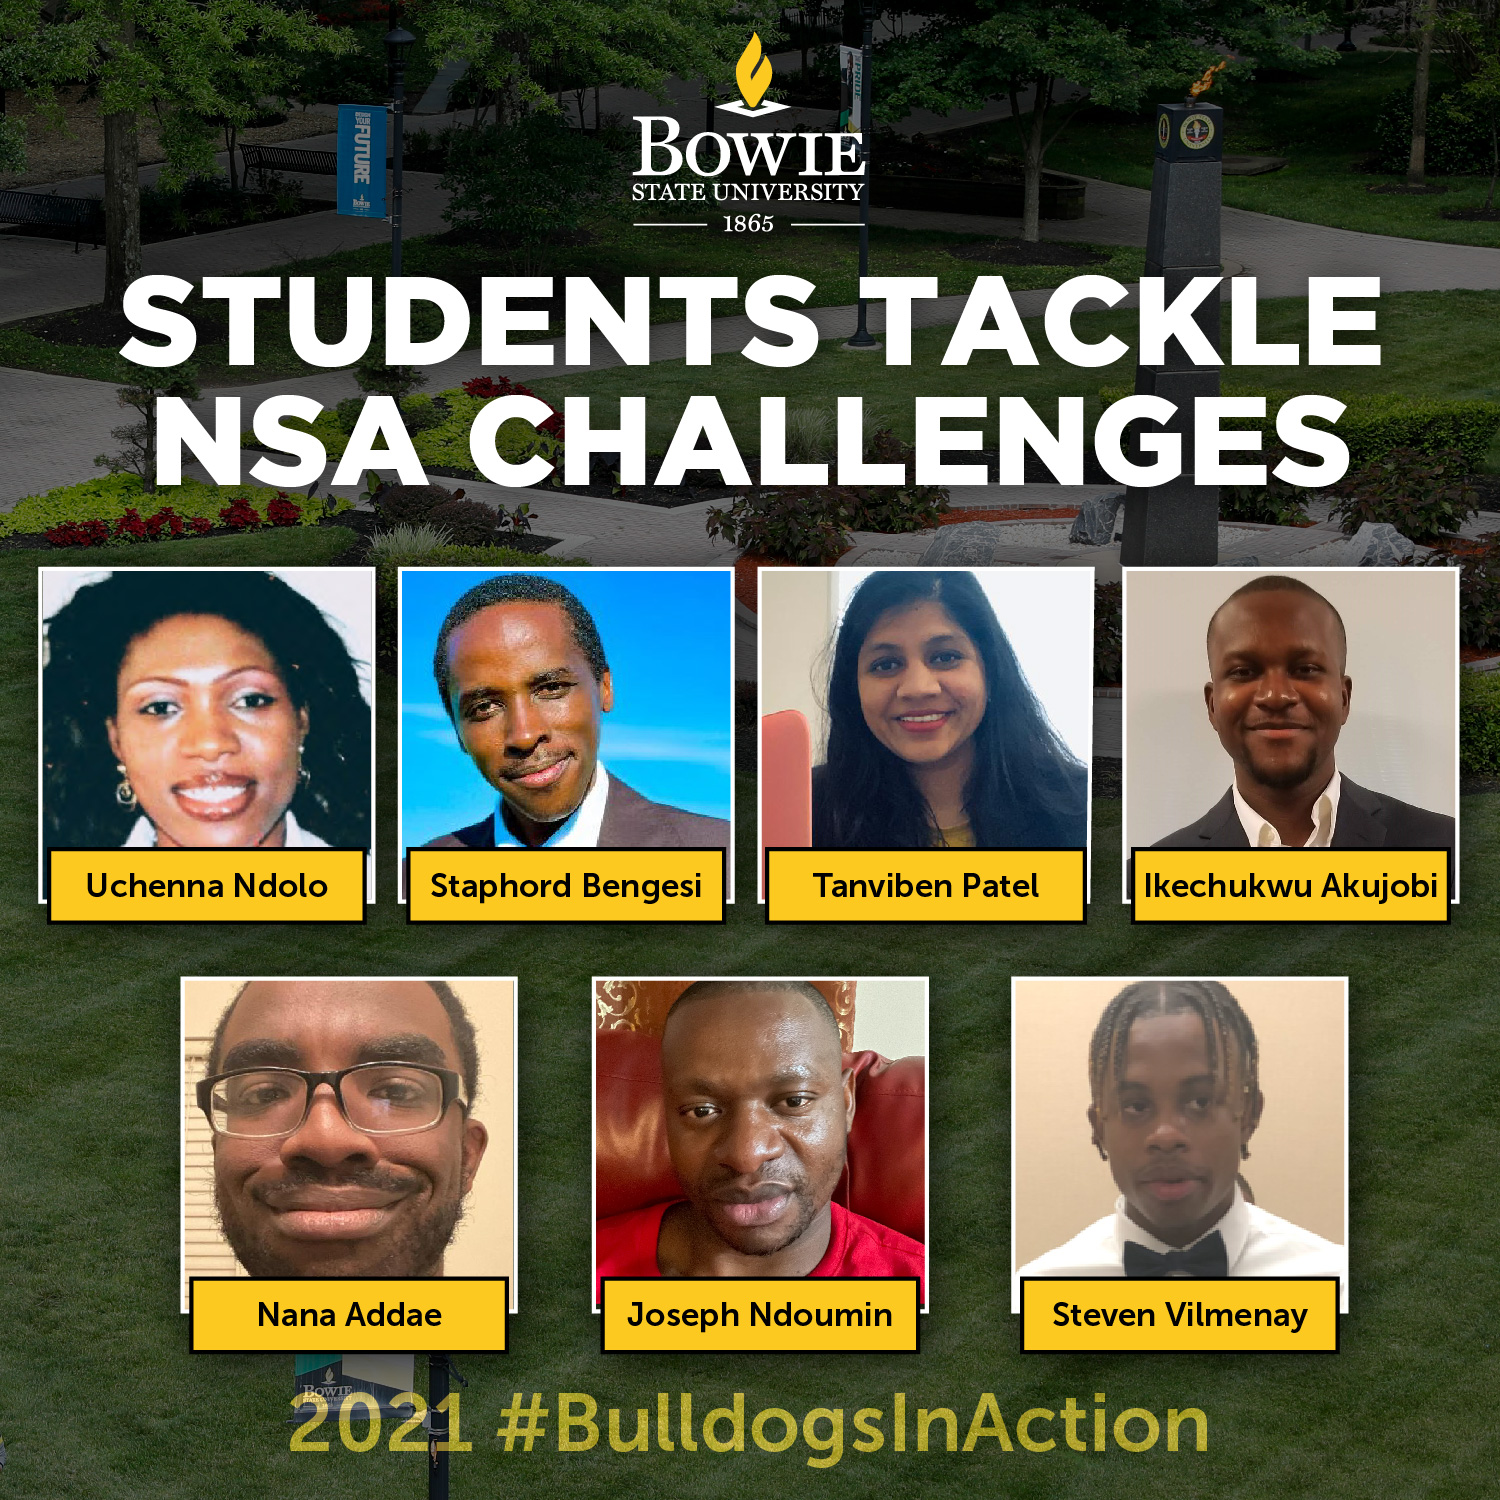 Bowie State University Students Tackle NSA Challenges 2021 #BulldogsInAction